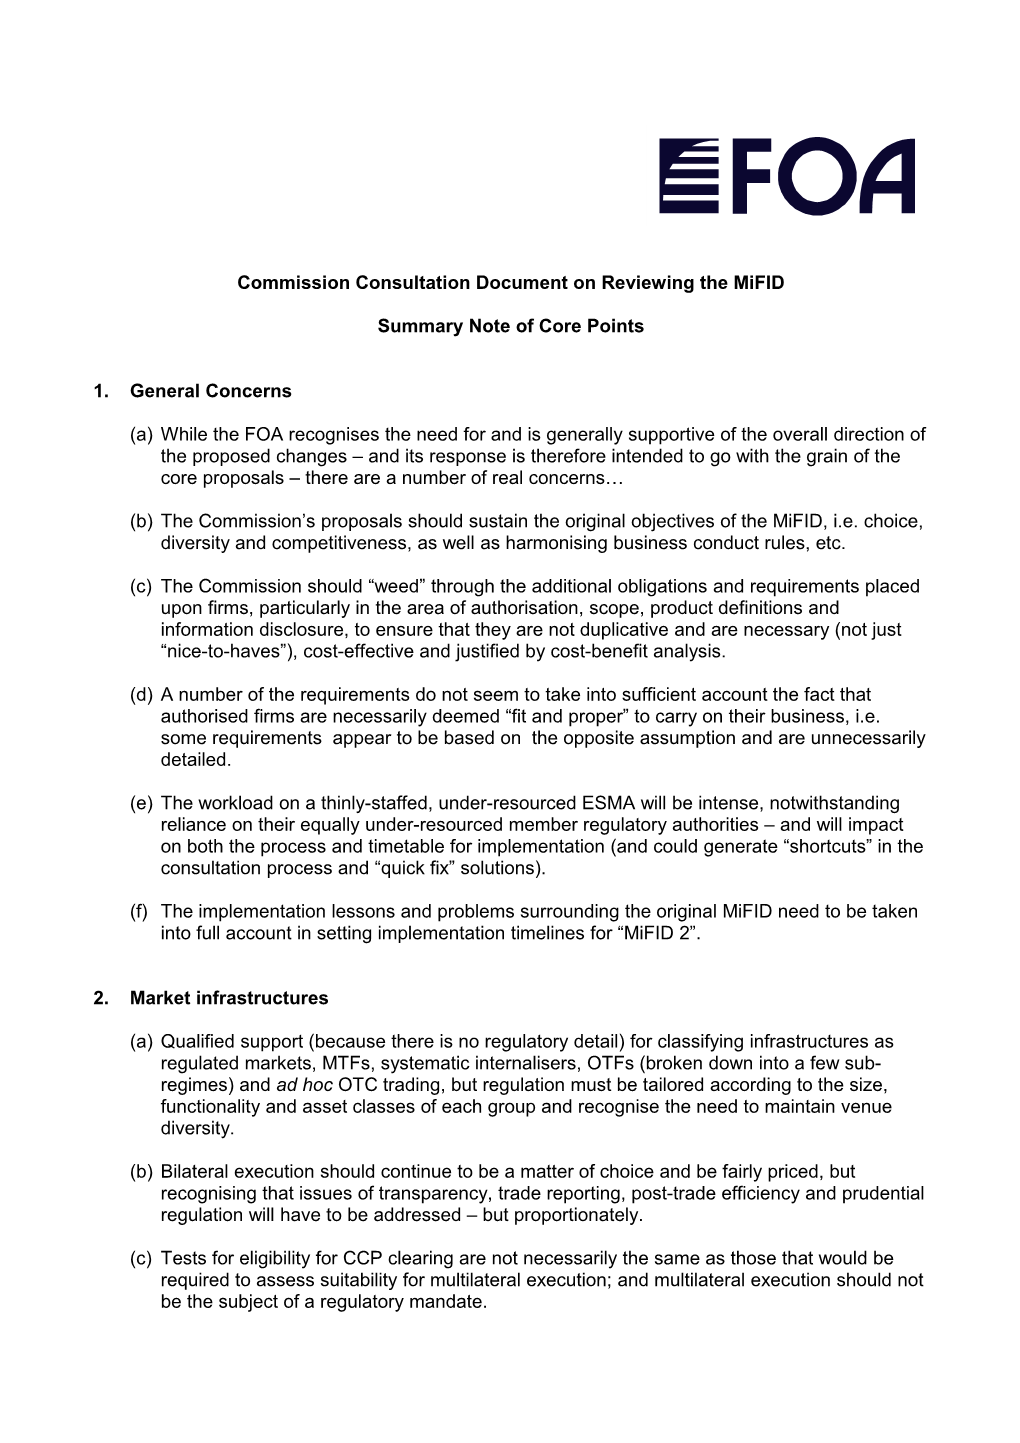 Commission Consultation Document on Reviewing the Mifid